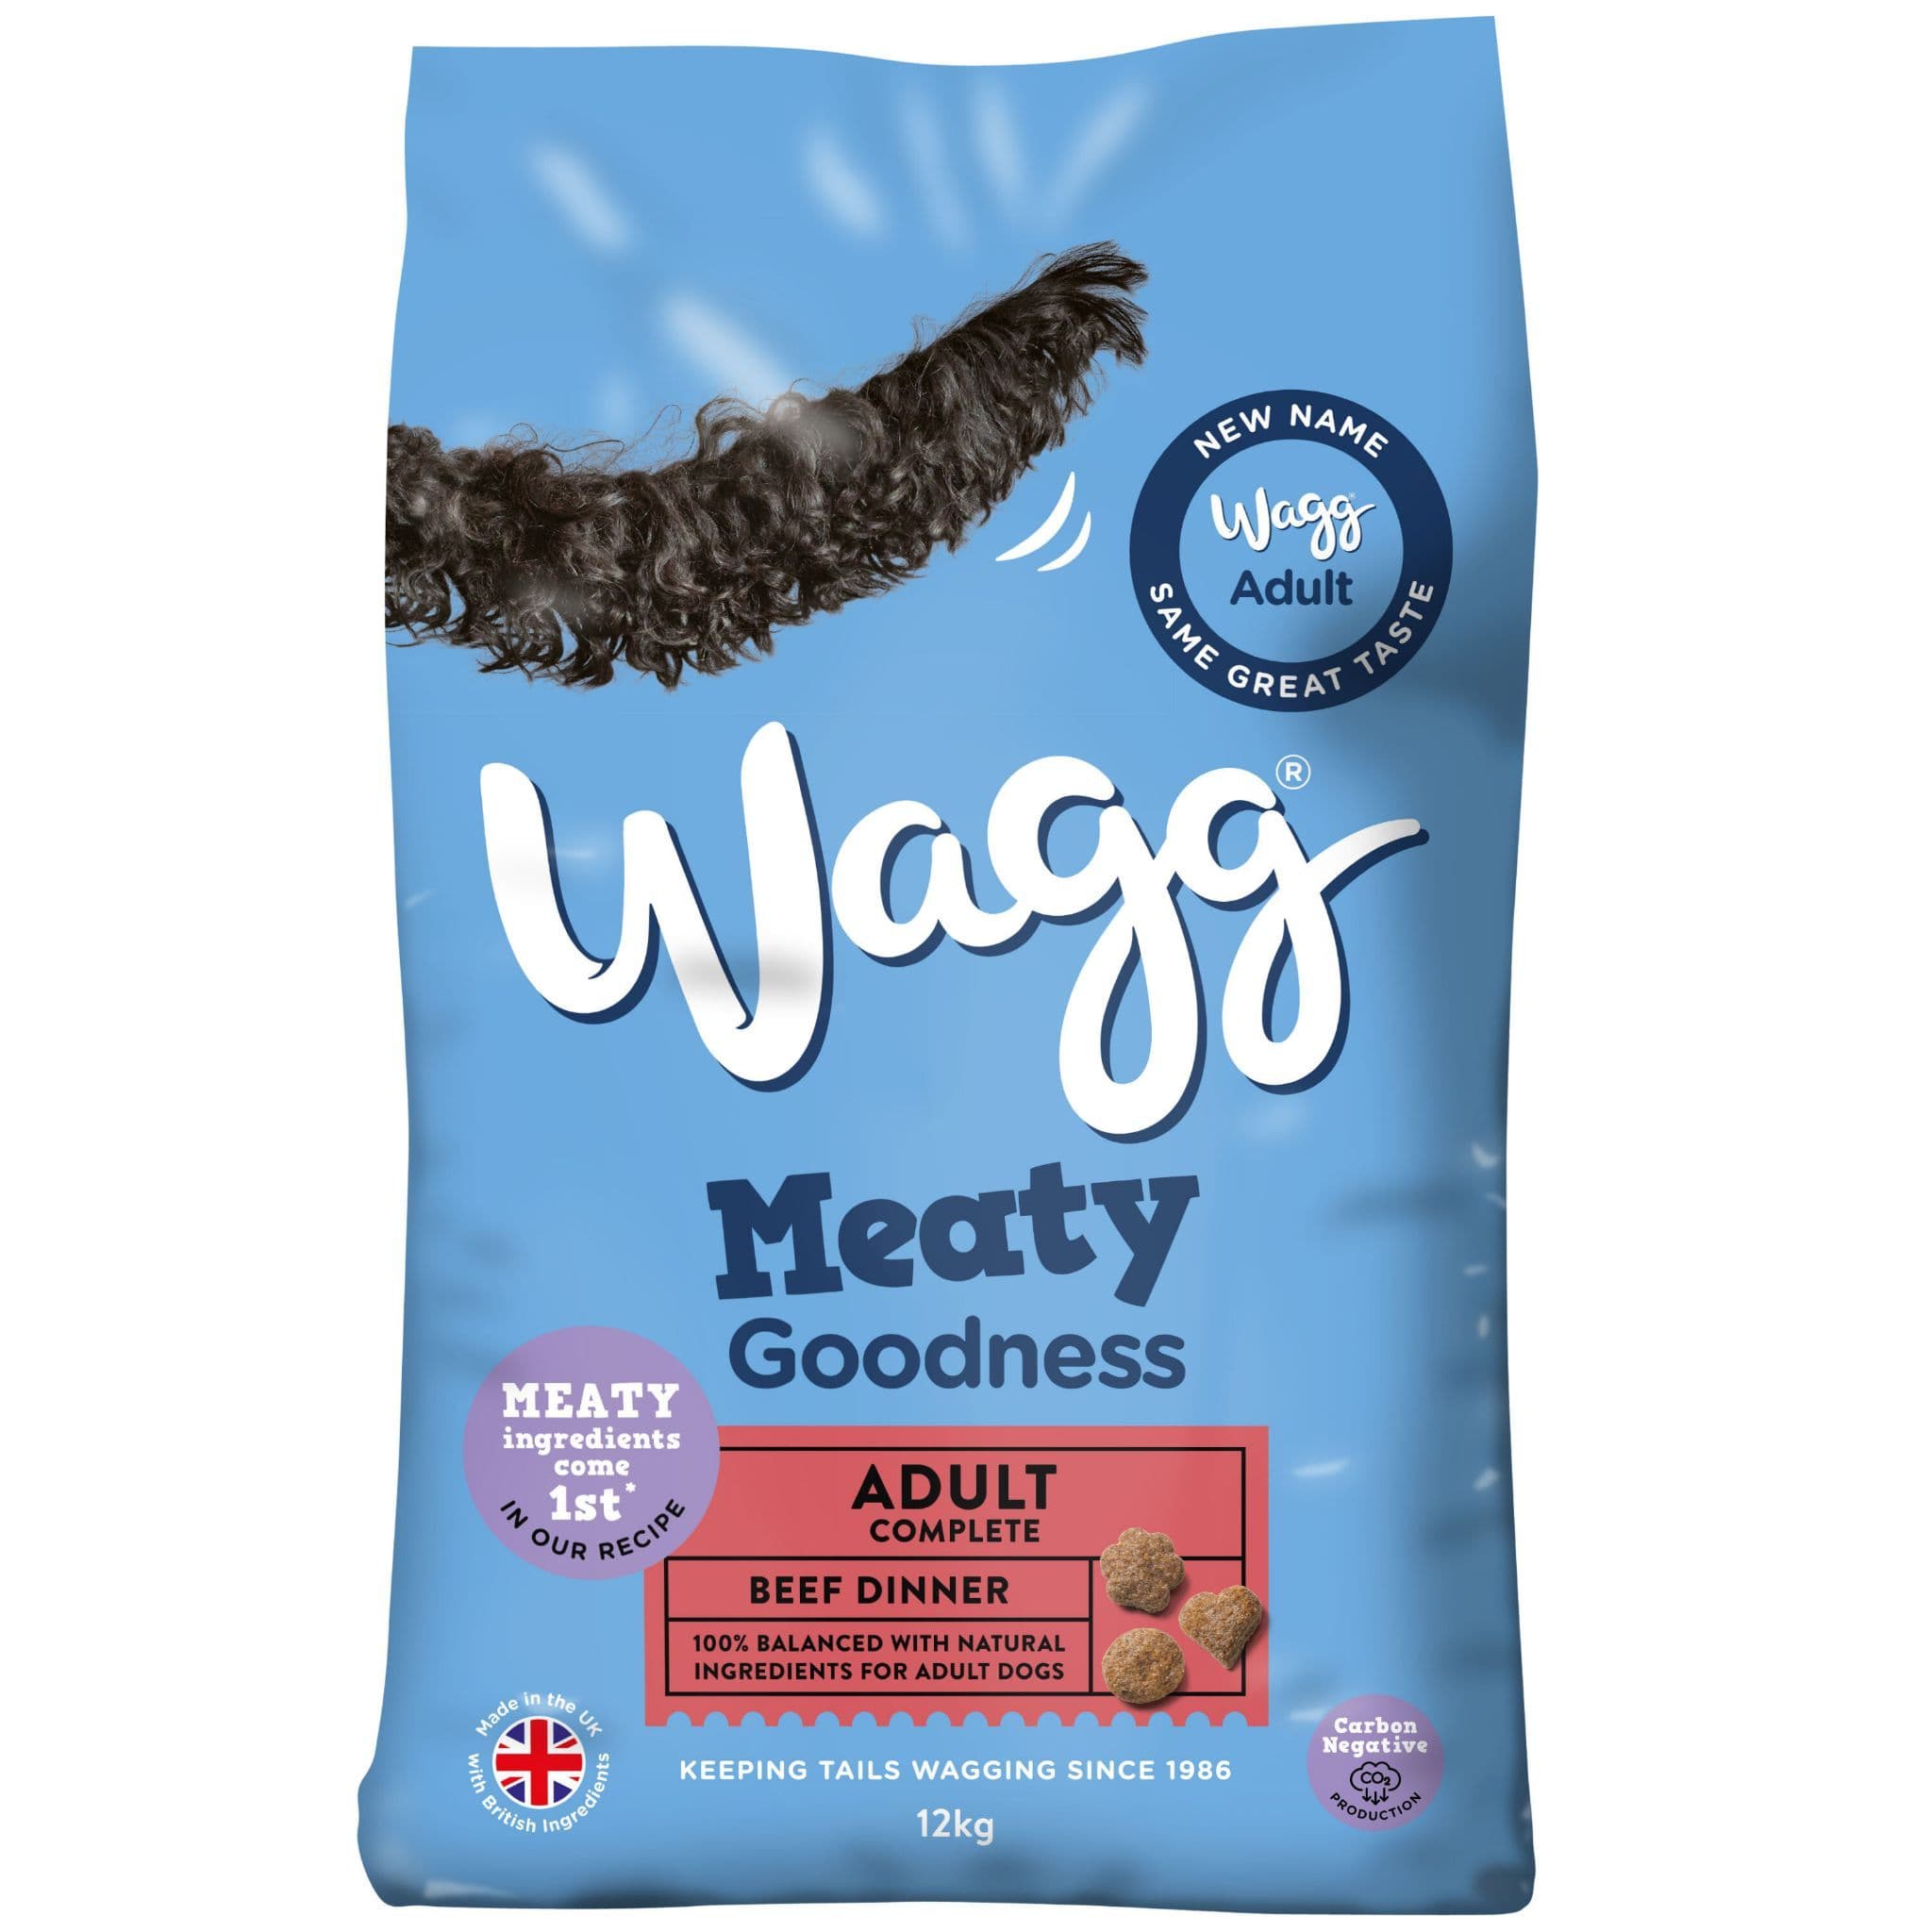 Wagg Meaty Goodness Adult Beef & Veg Dog Food 12kg